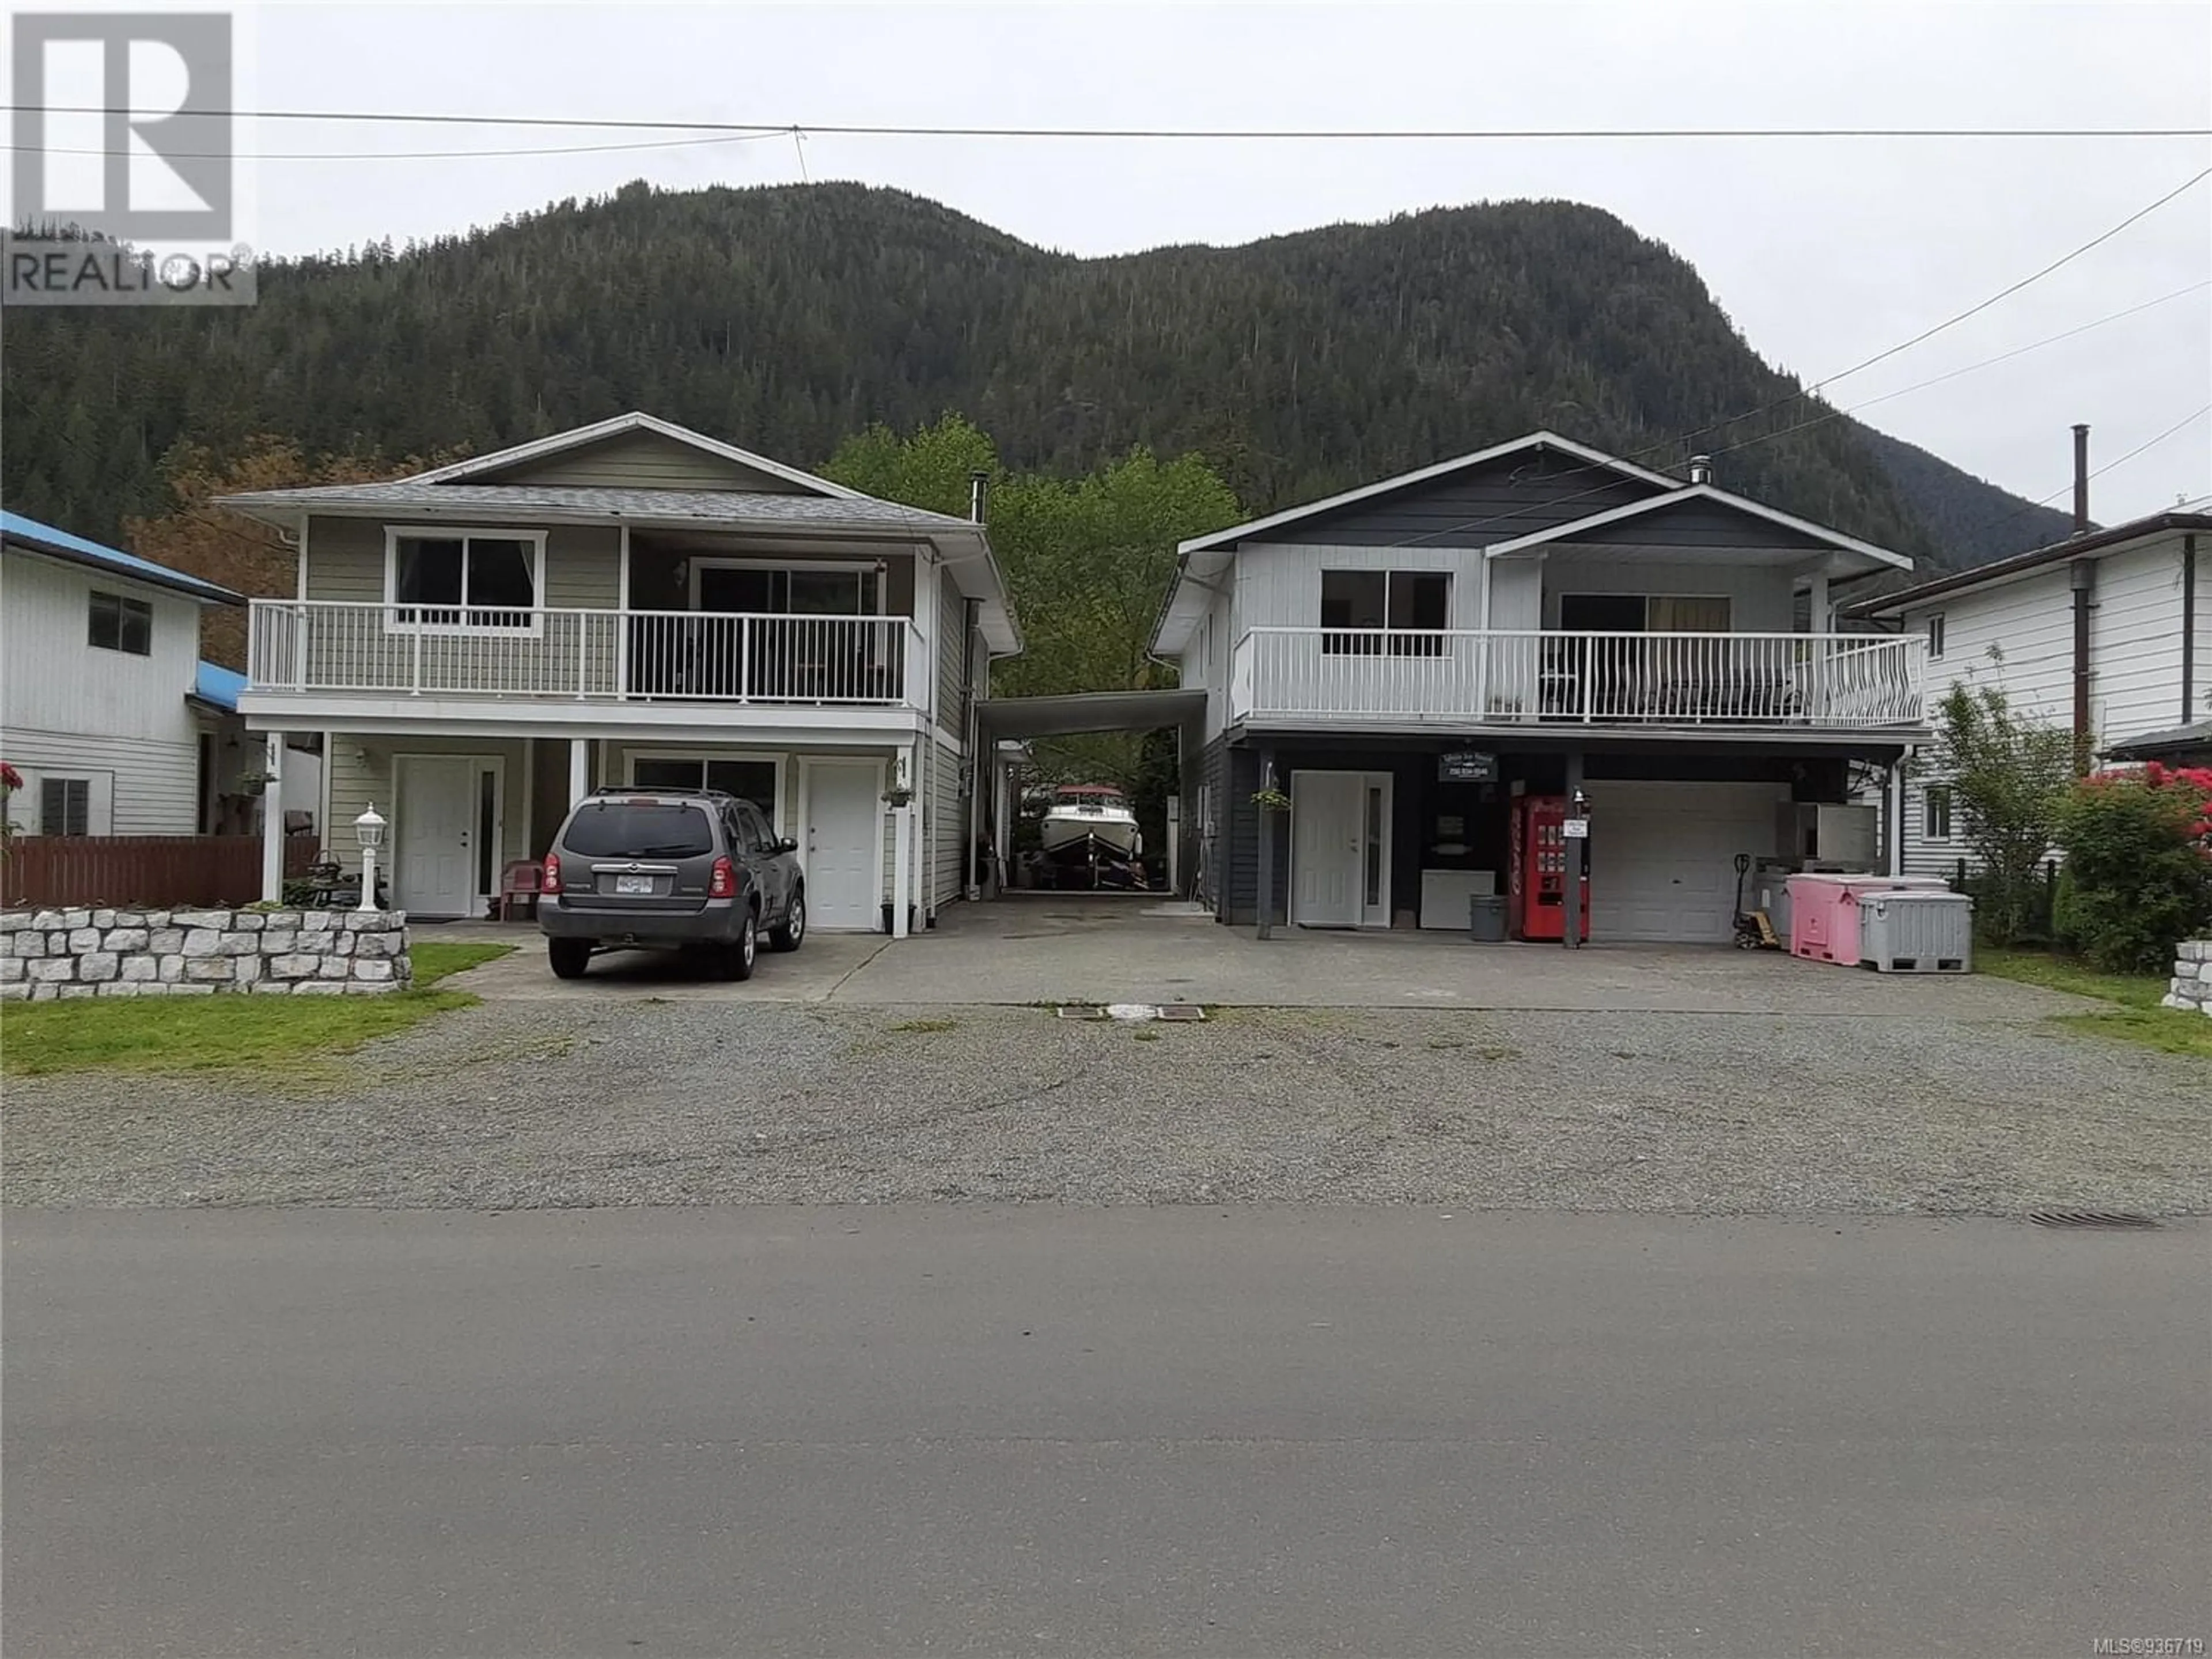 Outside view for 420/428 Alpine View Rd, Tahsis British Columbia V0P1X0